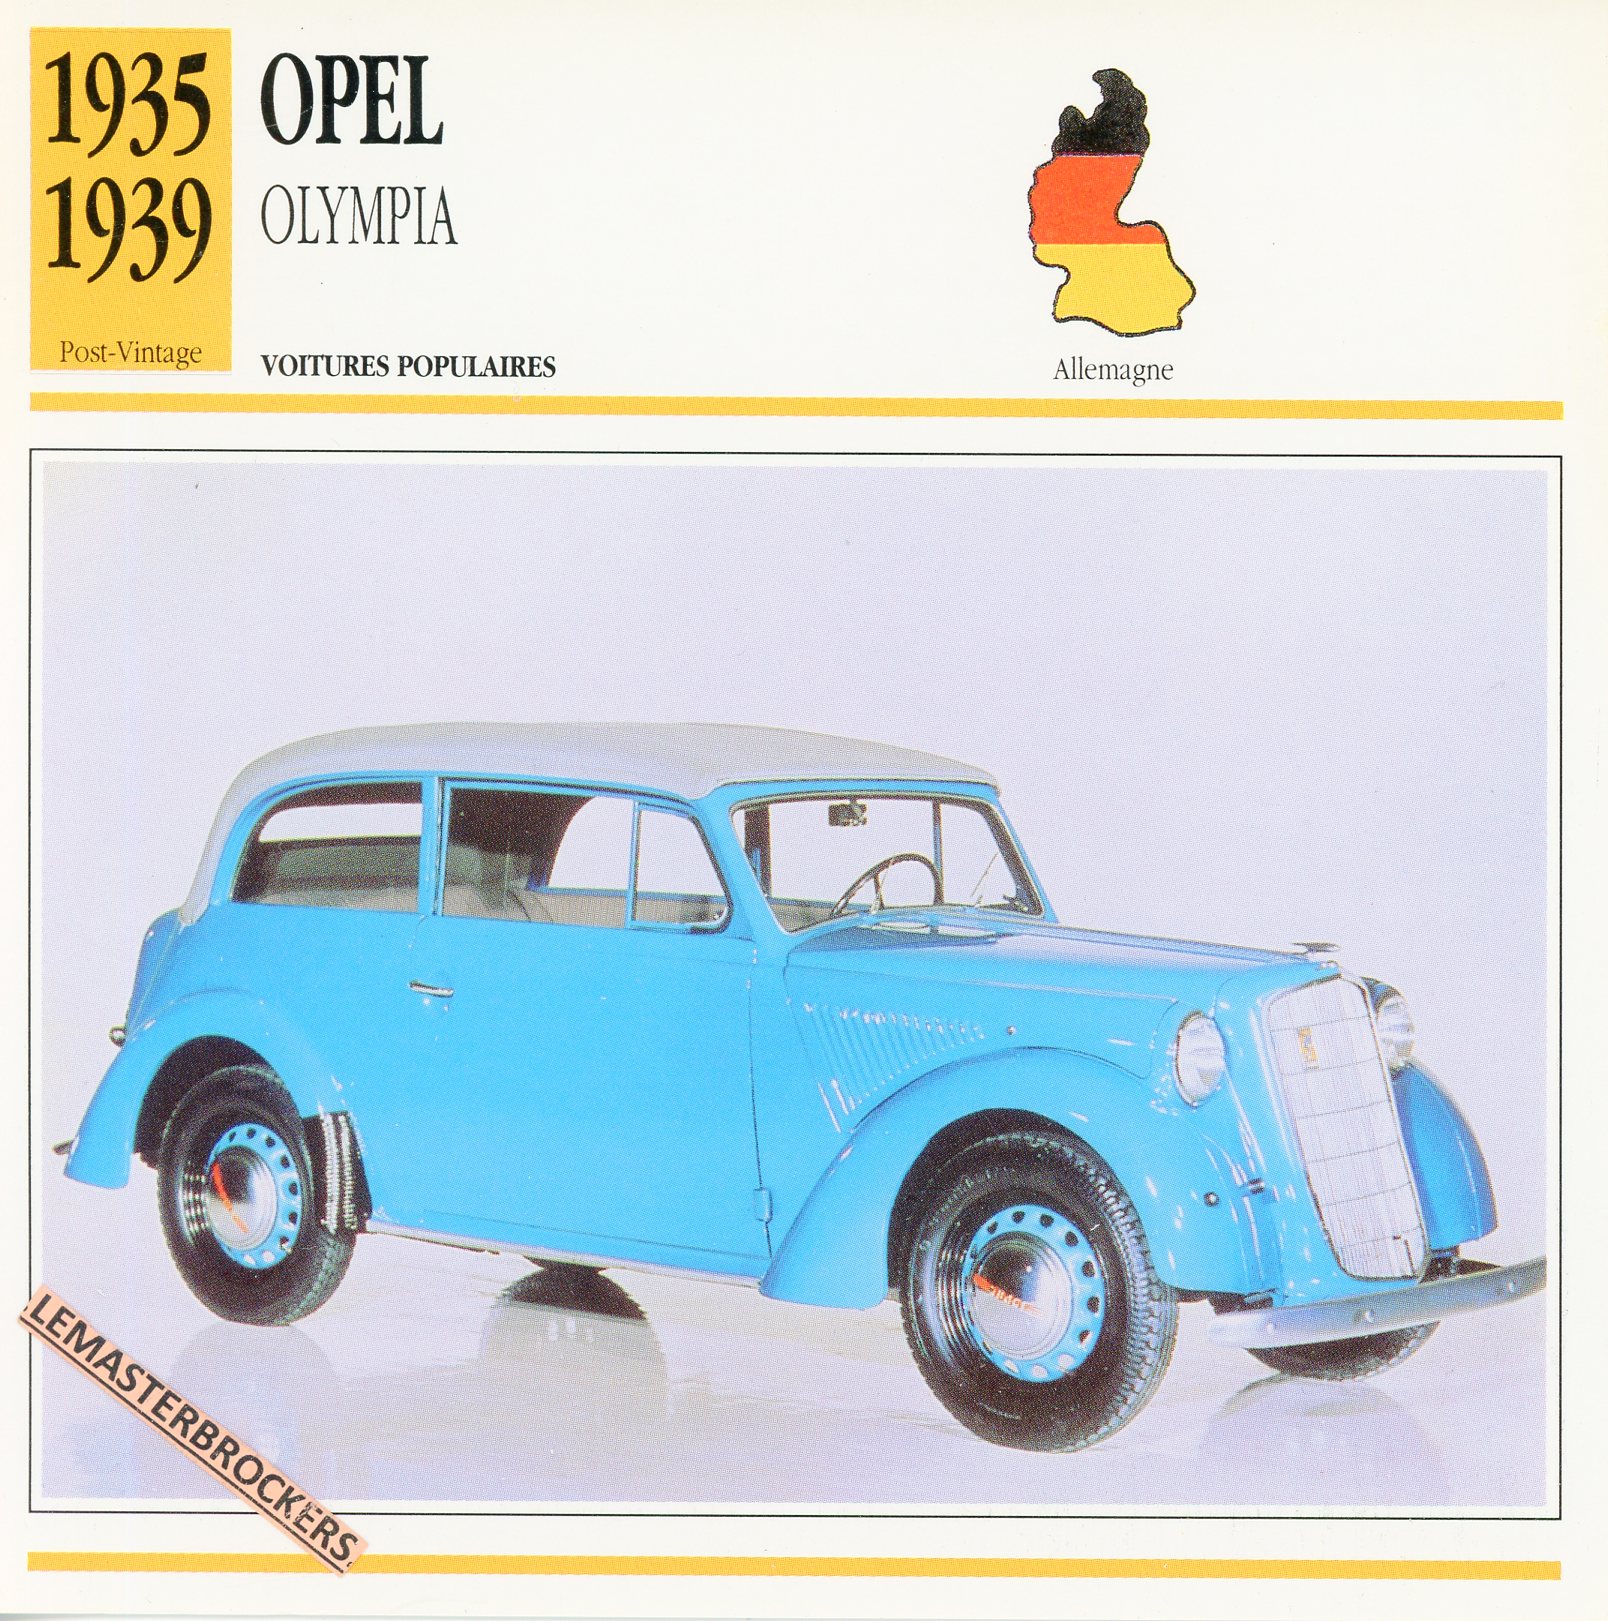 FICHE-OPEL-OLYMPIA-LEMASTERBROCKERS-FICHE-AUTO-CARS-CARD-ATLAS-FRENCH